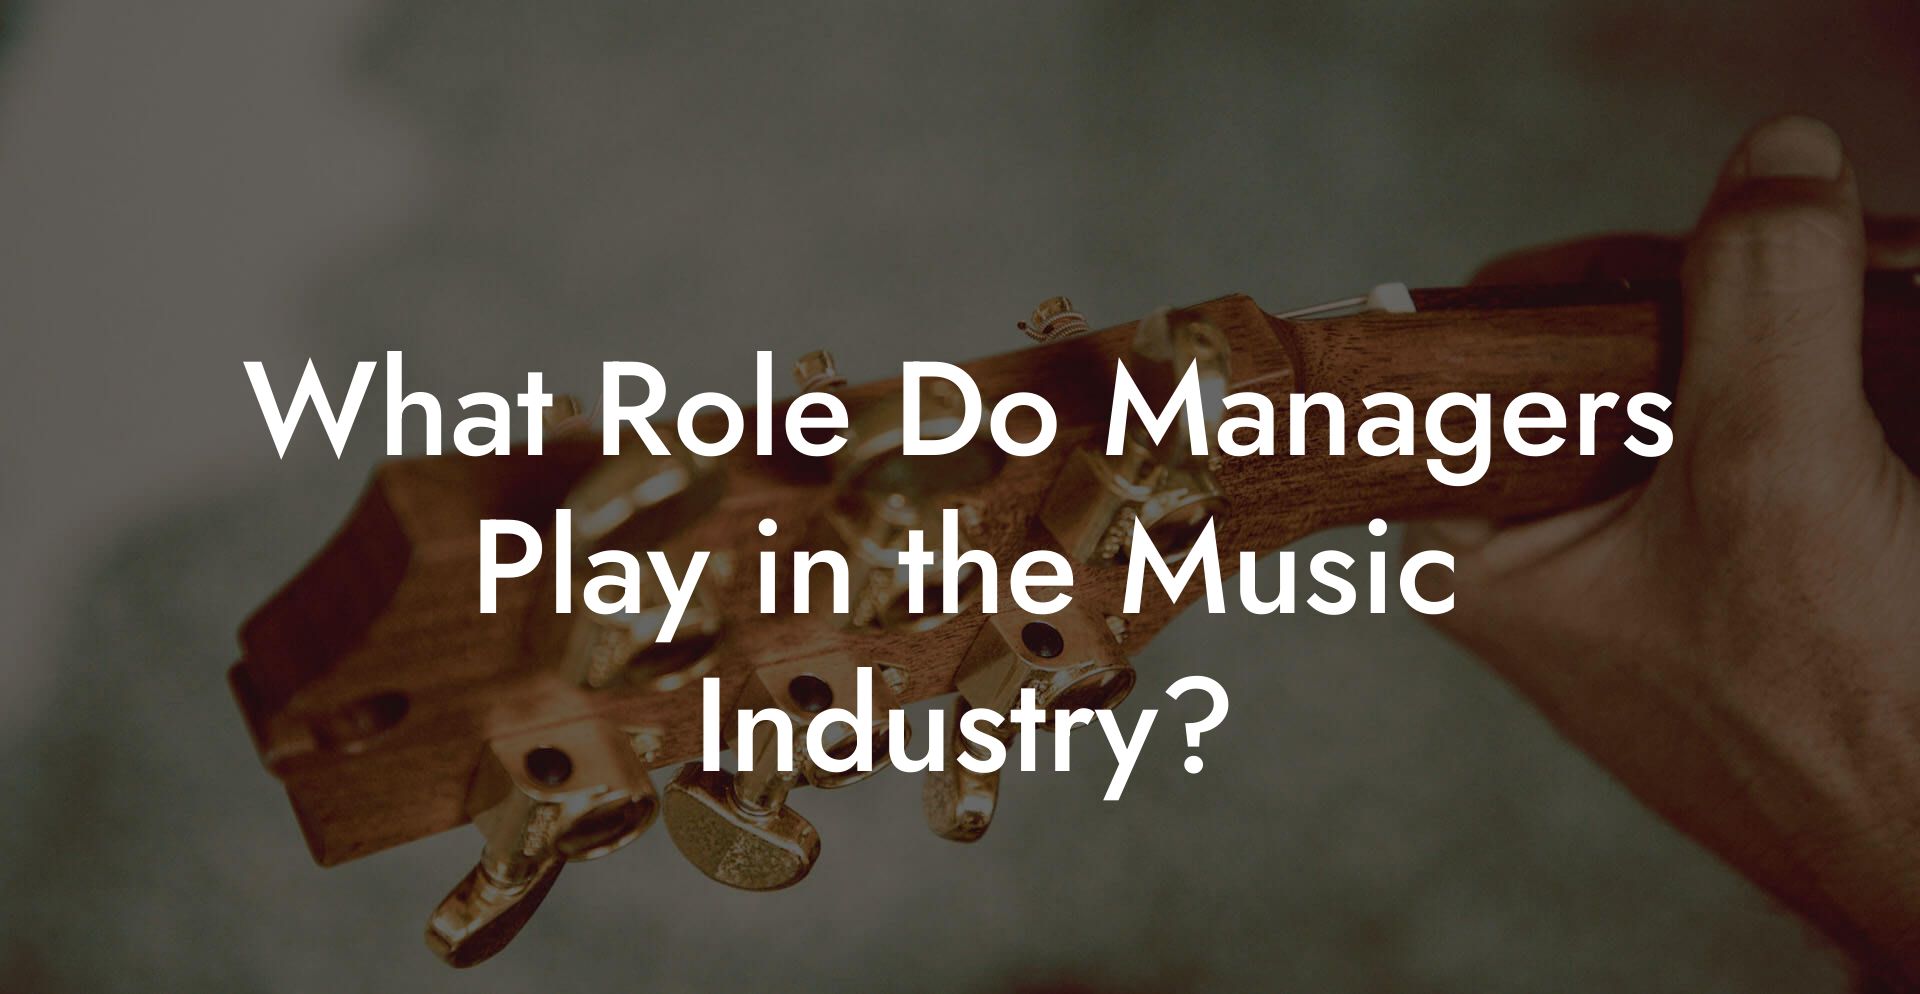 What Role Do Managers Play in the Music Industry?